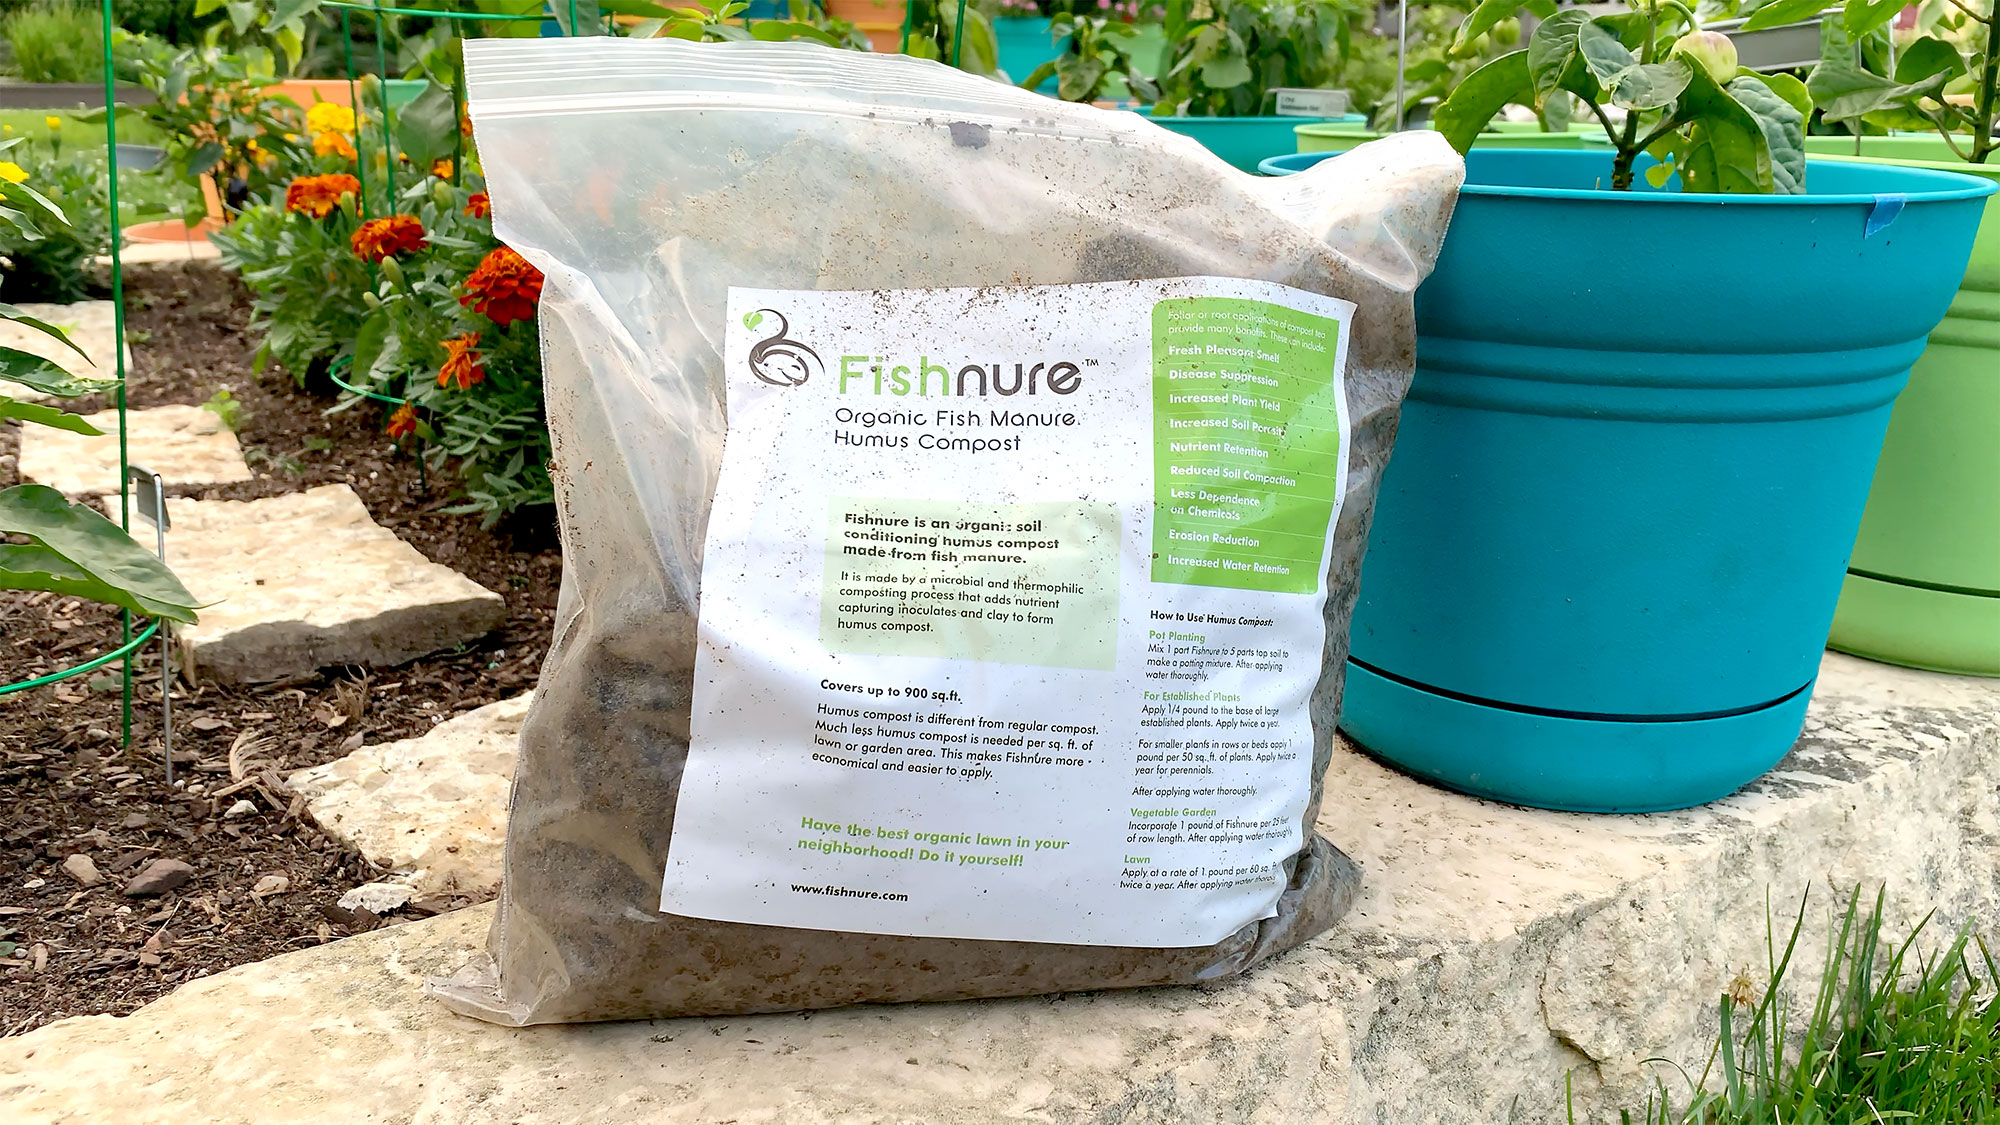 A bag of Fishnure sitting outdoors in the garden